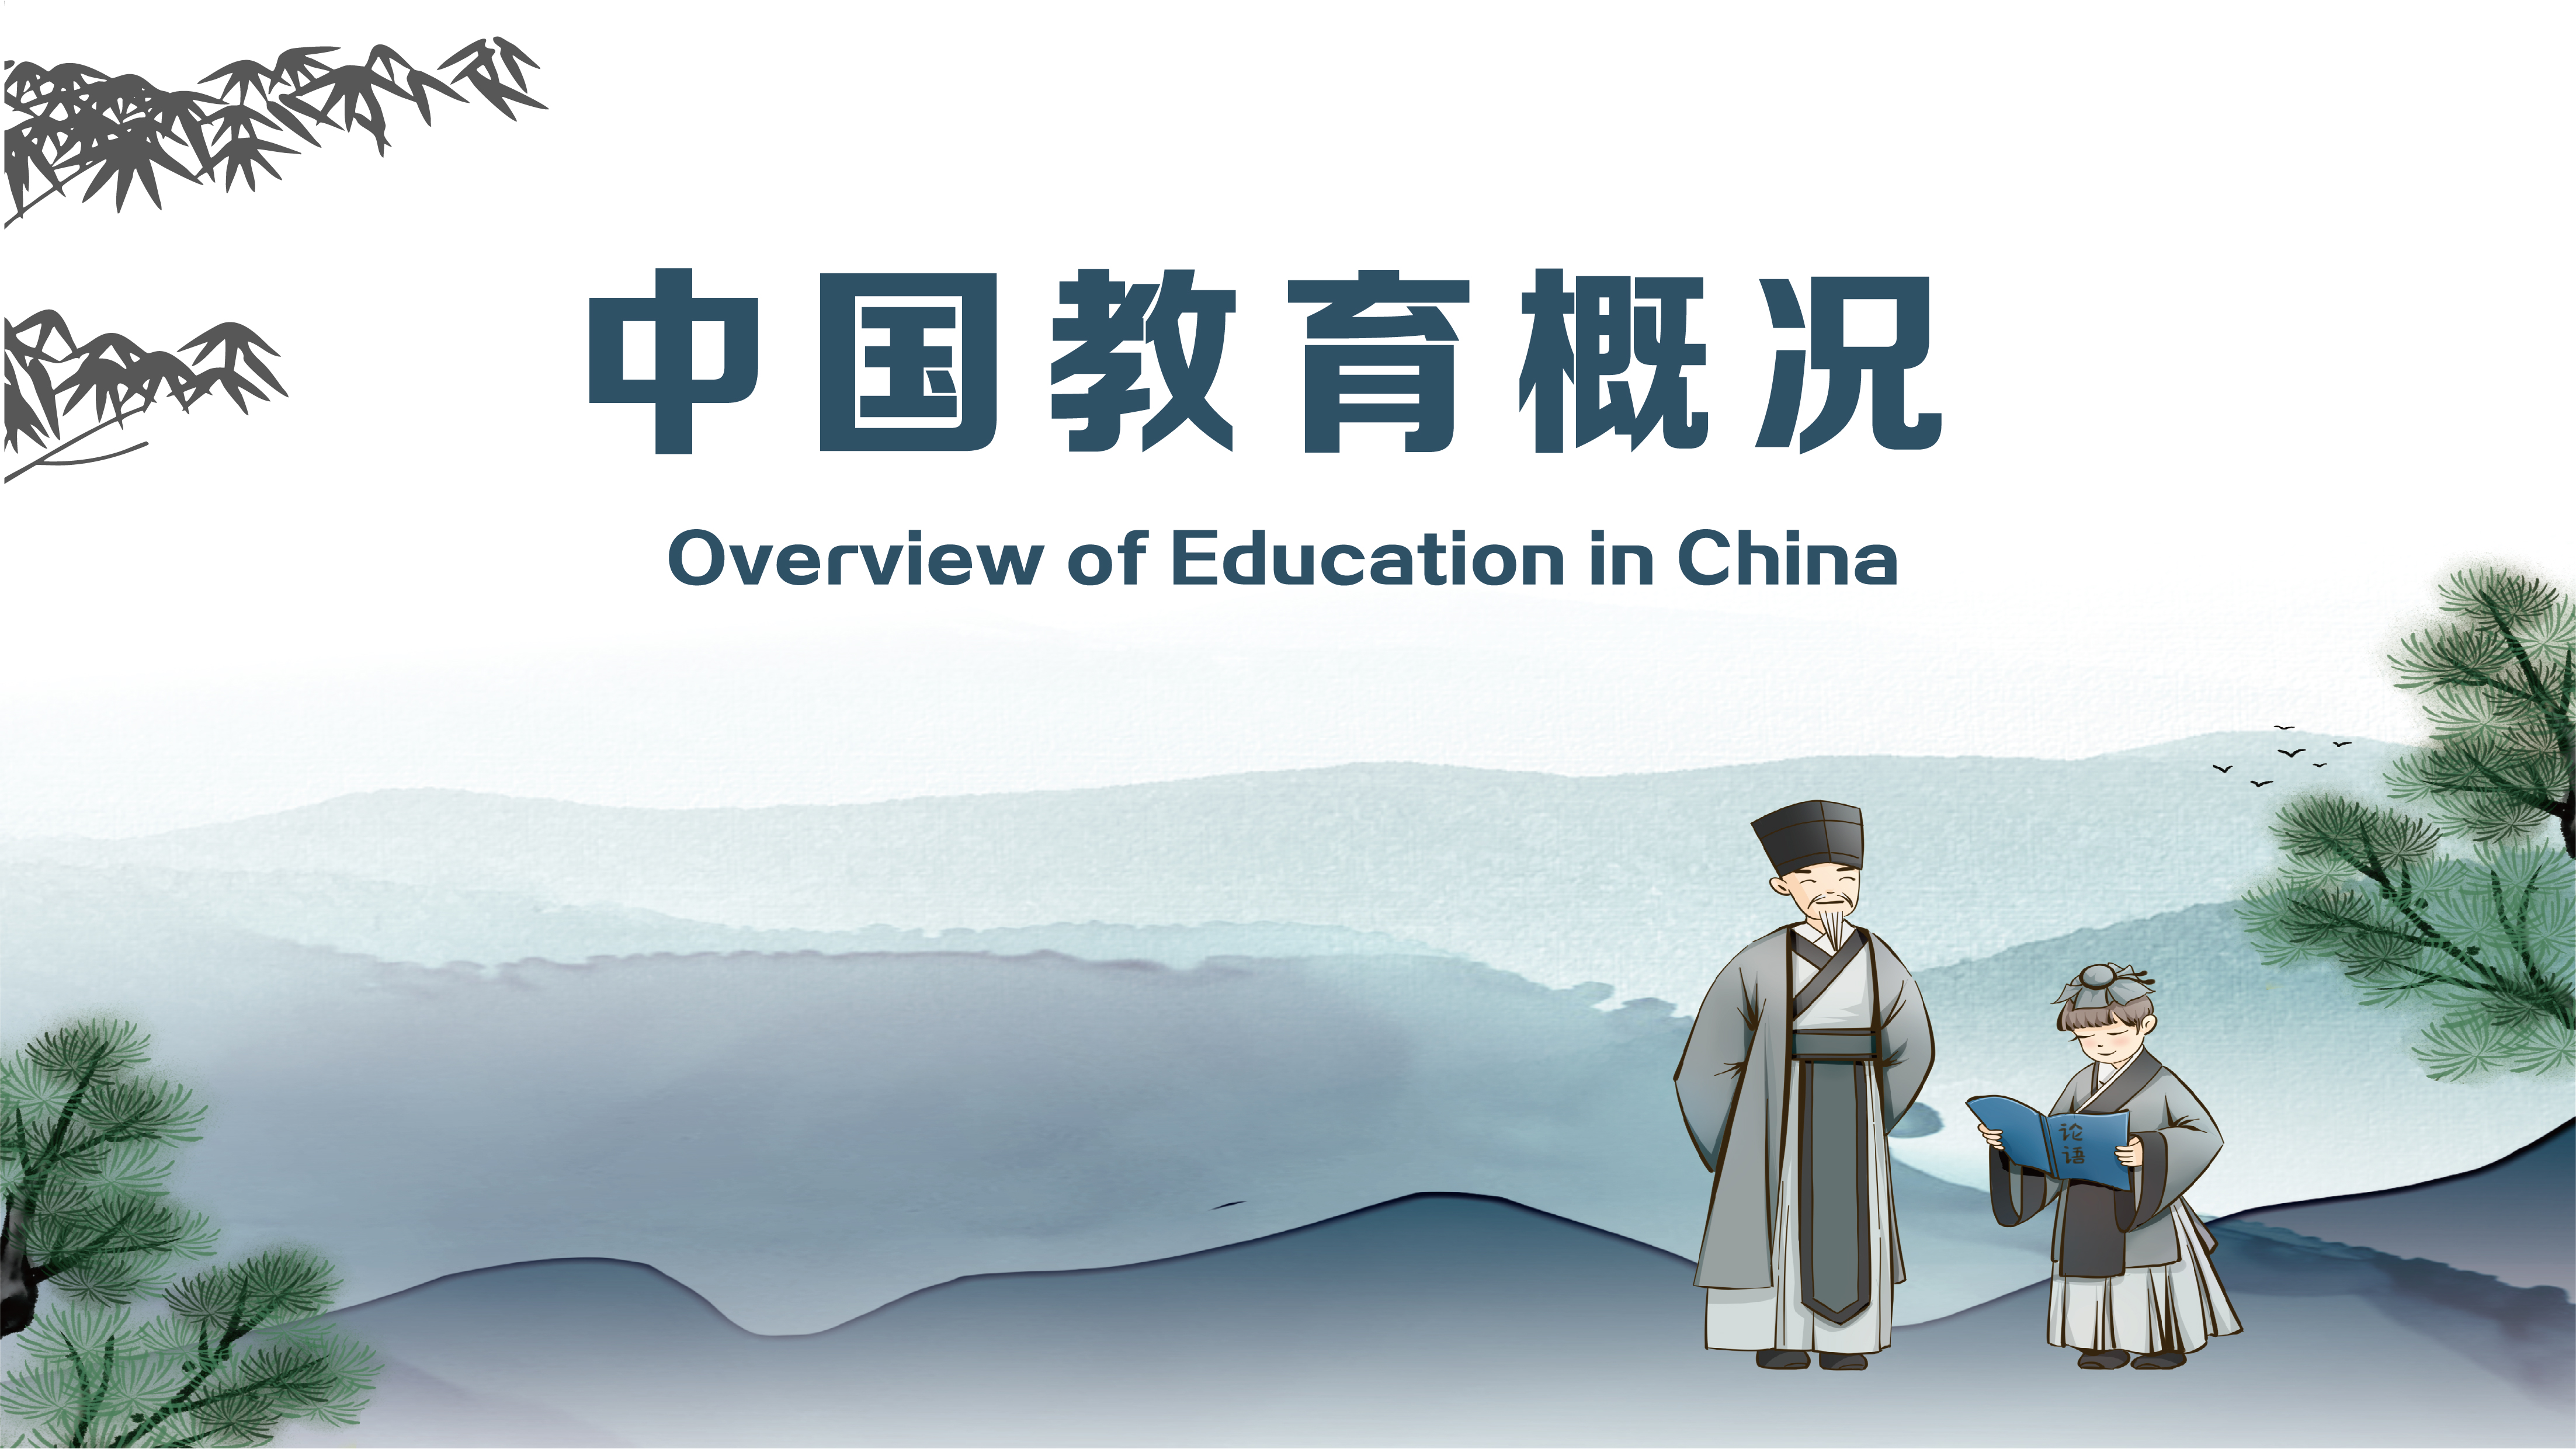 Overview of Education in China